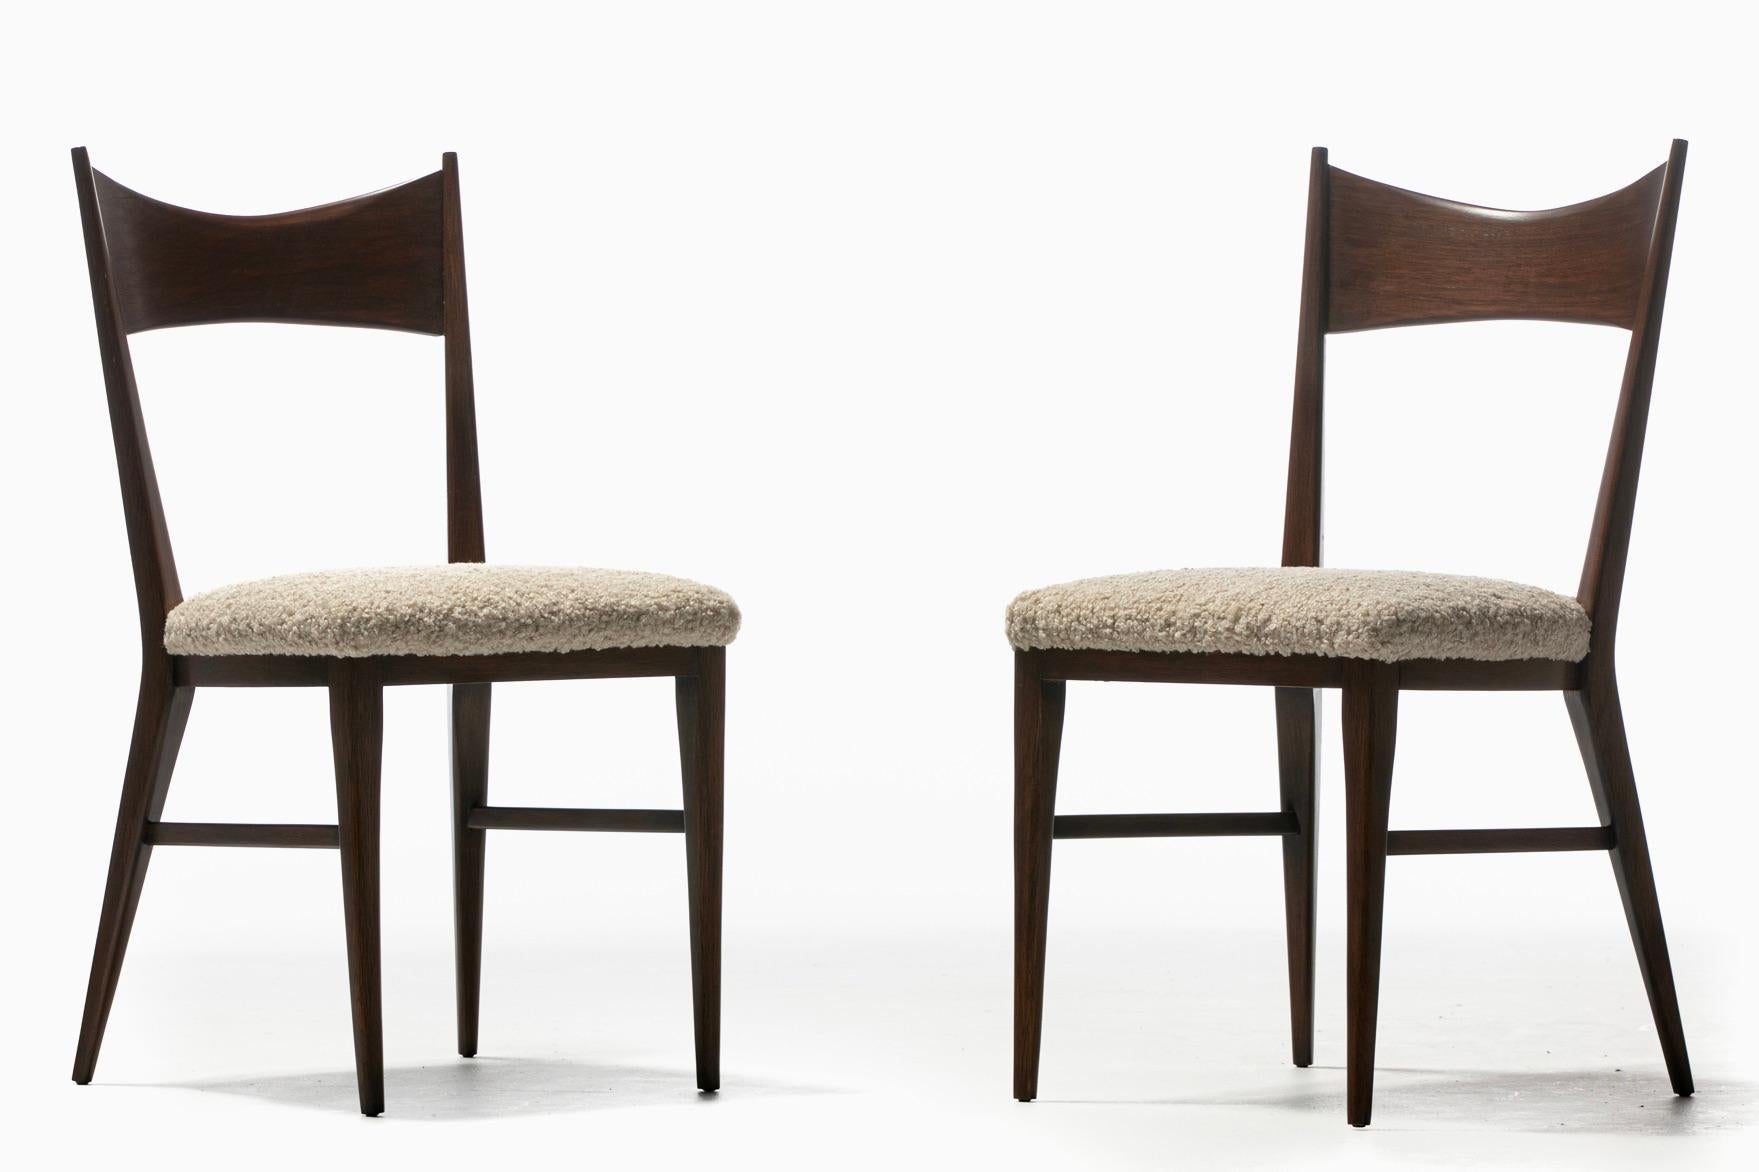 An inspiring pair of fully restored Paul McCobb walnut side chairs with new seat upholstery finished in softly textured ivory white bouclé. Paul McCobb is known for his talented delivery of sexy classic Mid-Century Modern best of the best furniture.